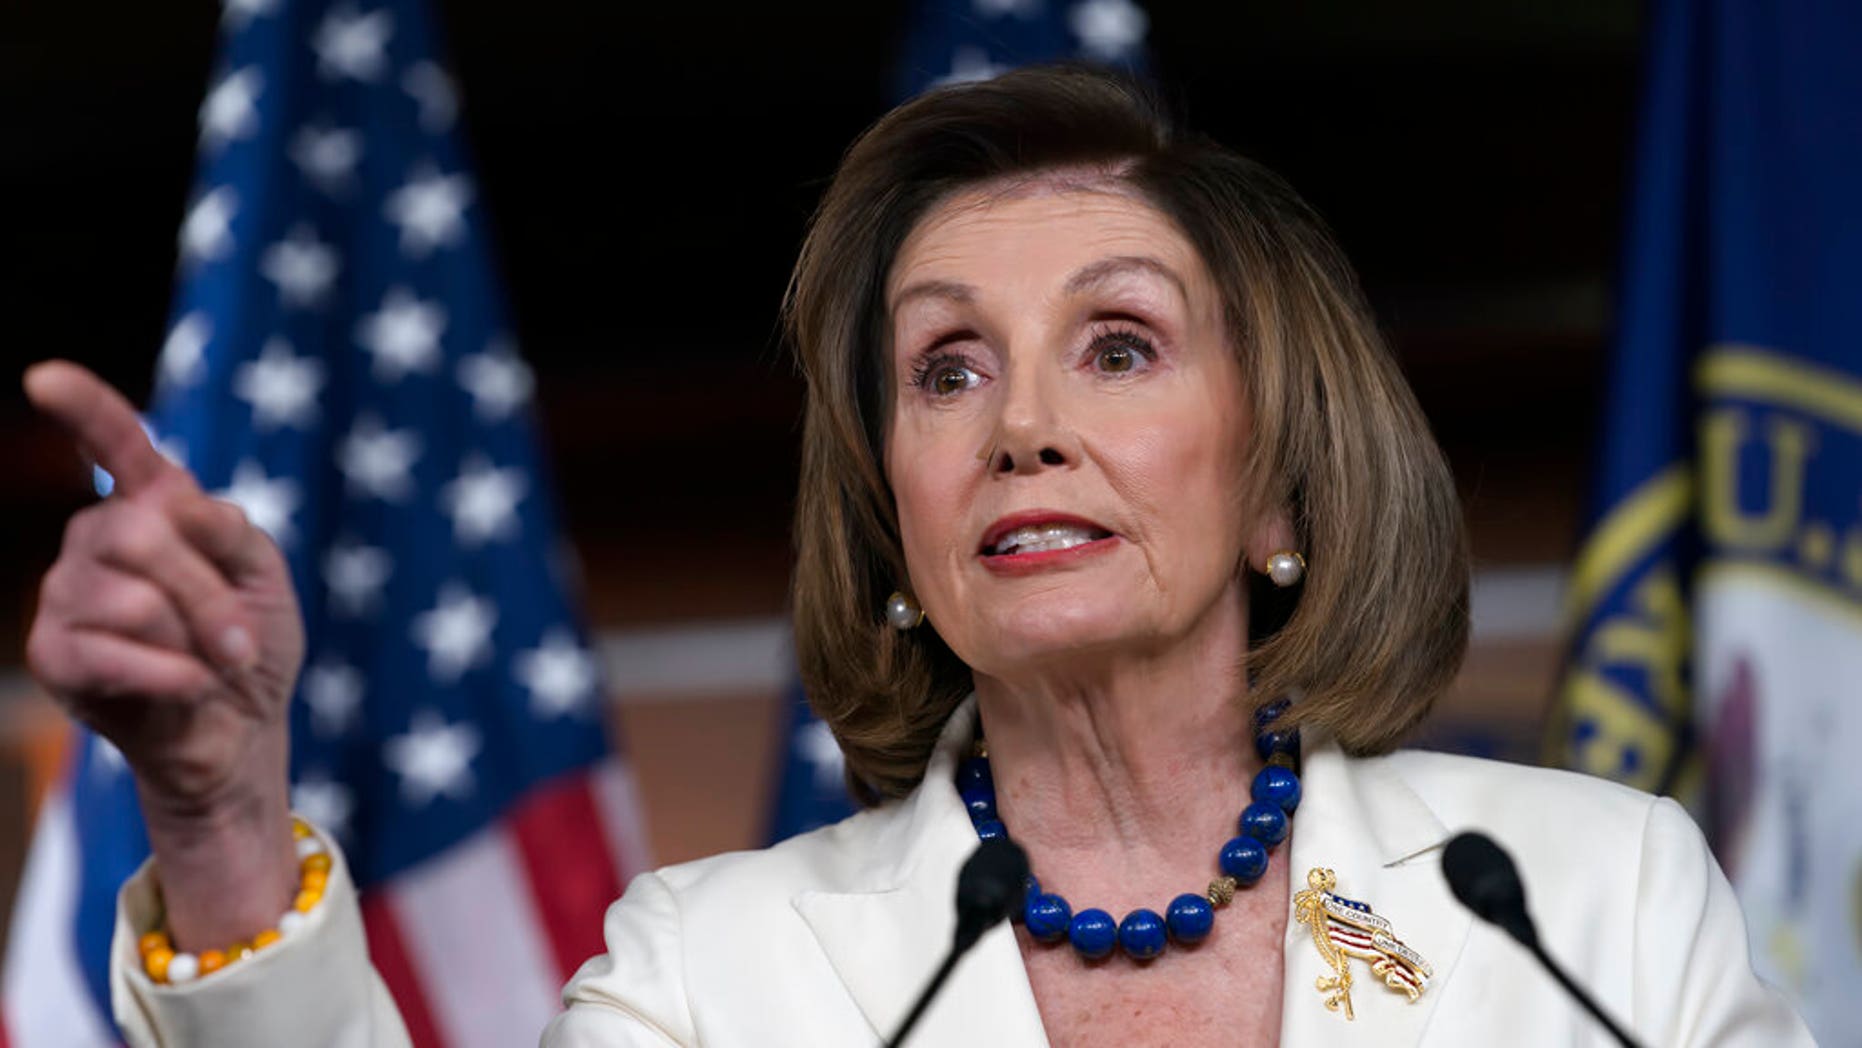 Pelosi Calls For Articles Of Impeachment Against Trump But Then Doesn